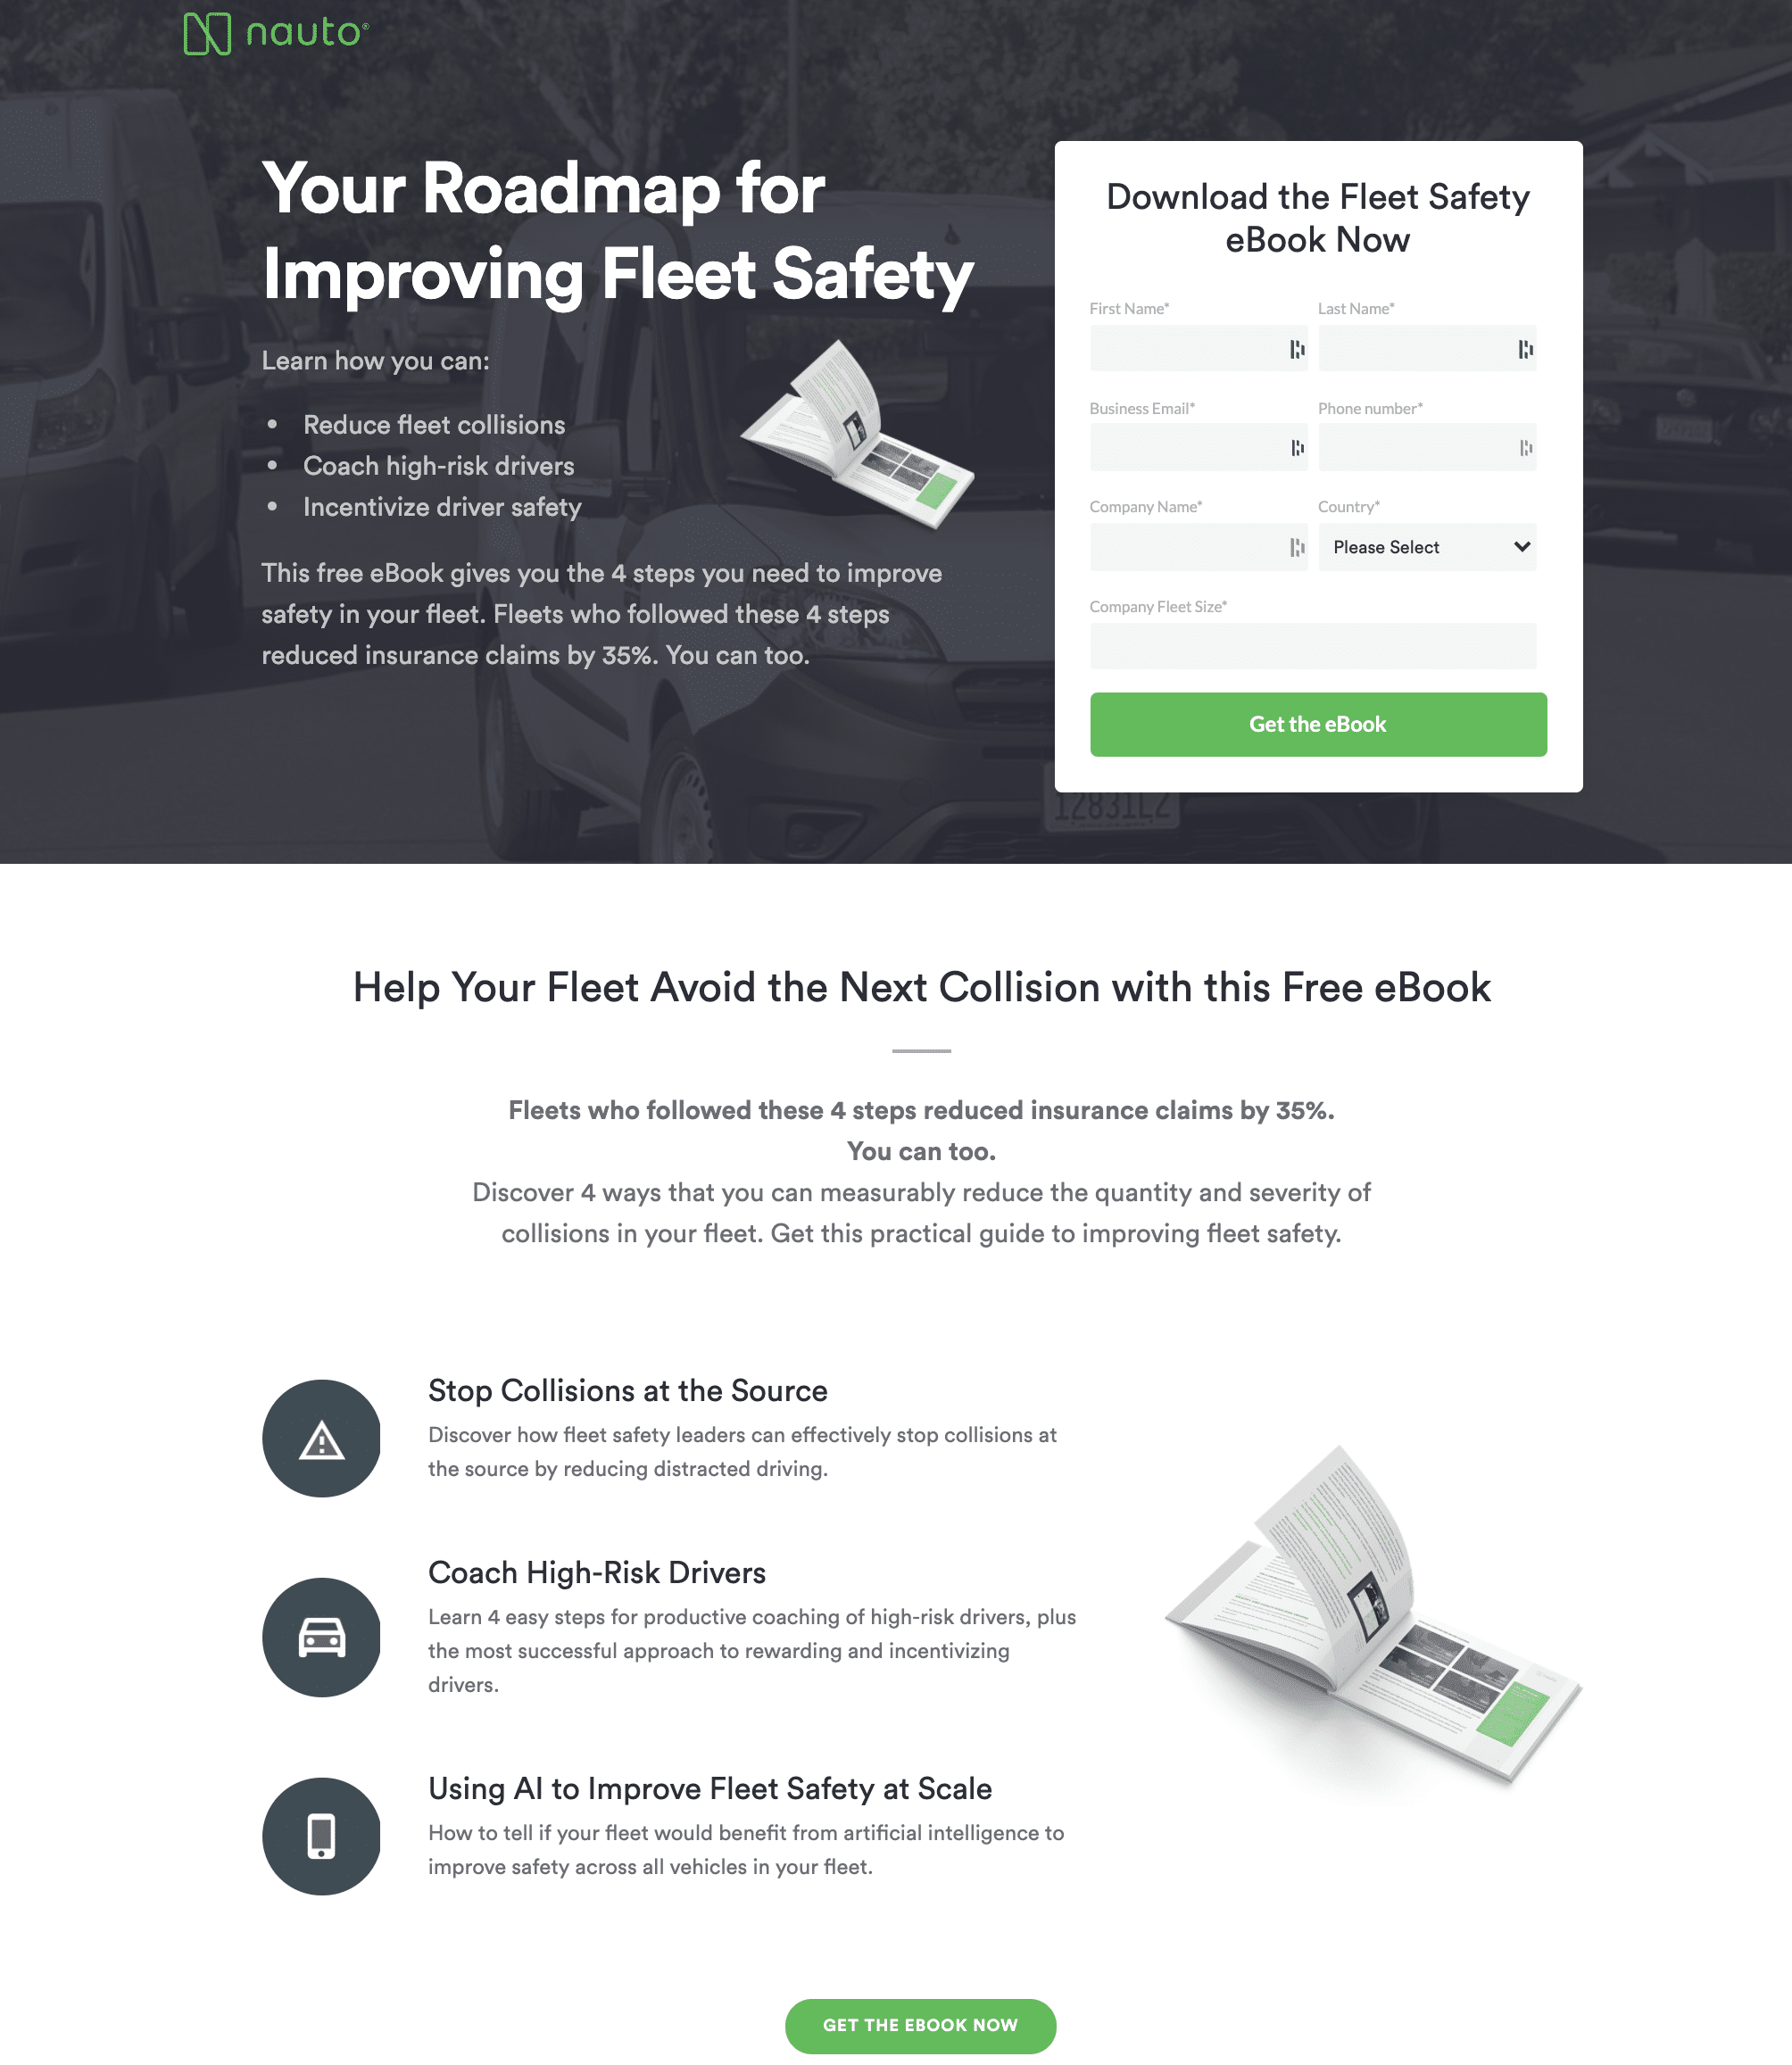 Nauto landing page to download their free eBook.